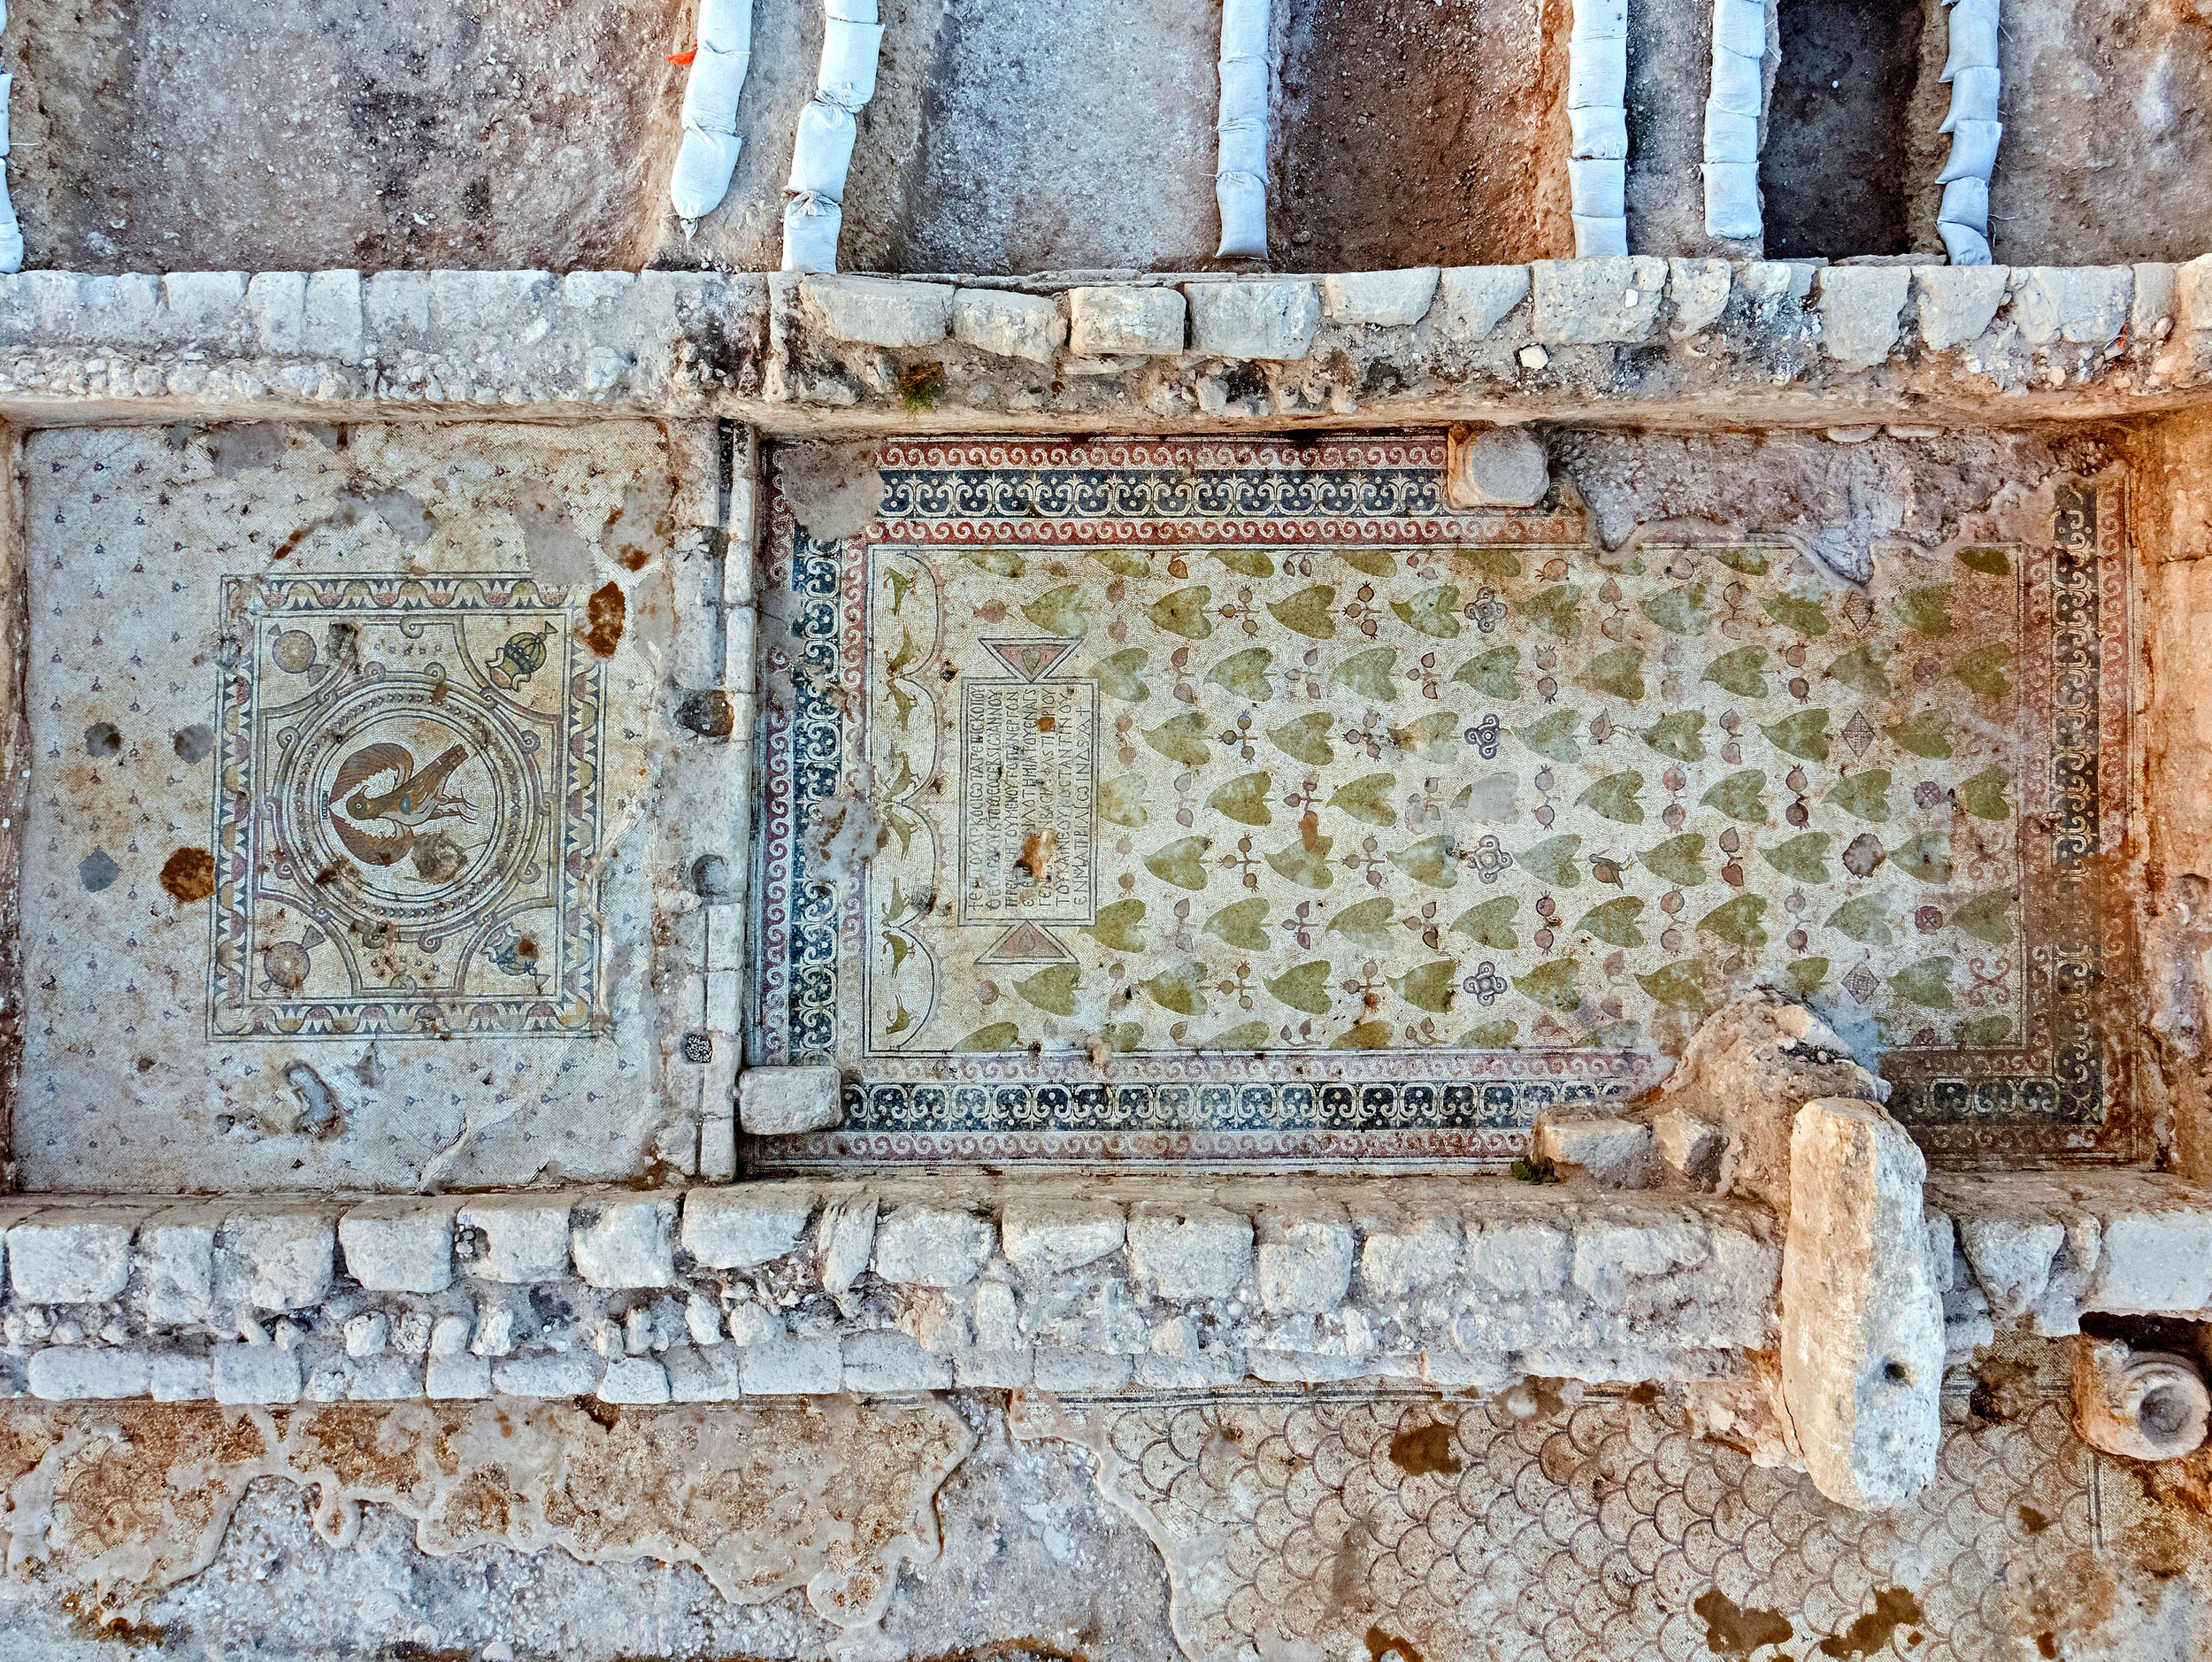 Mosaics uncovered on the church floor.